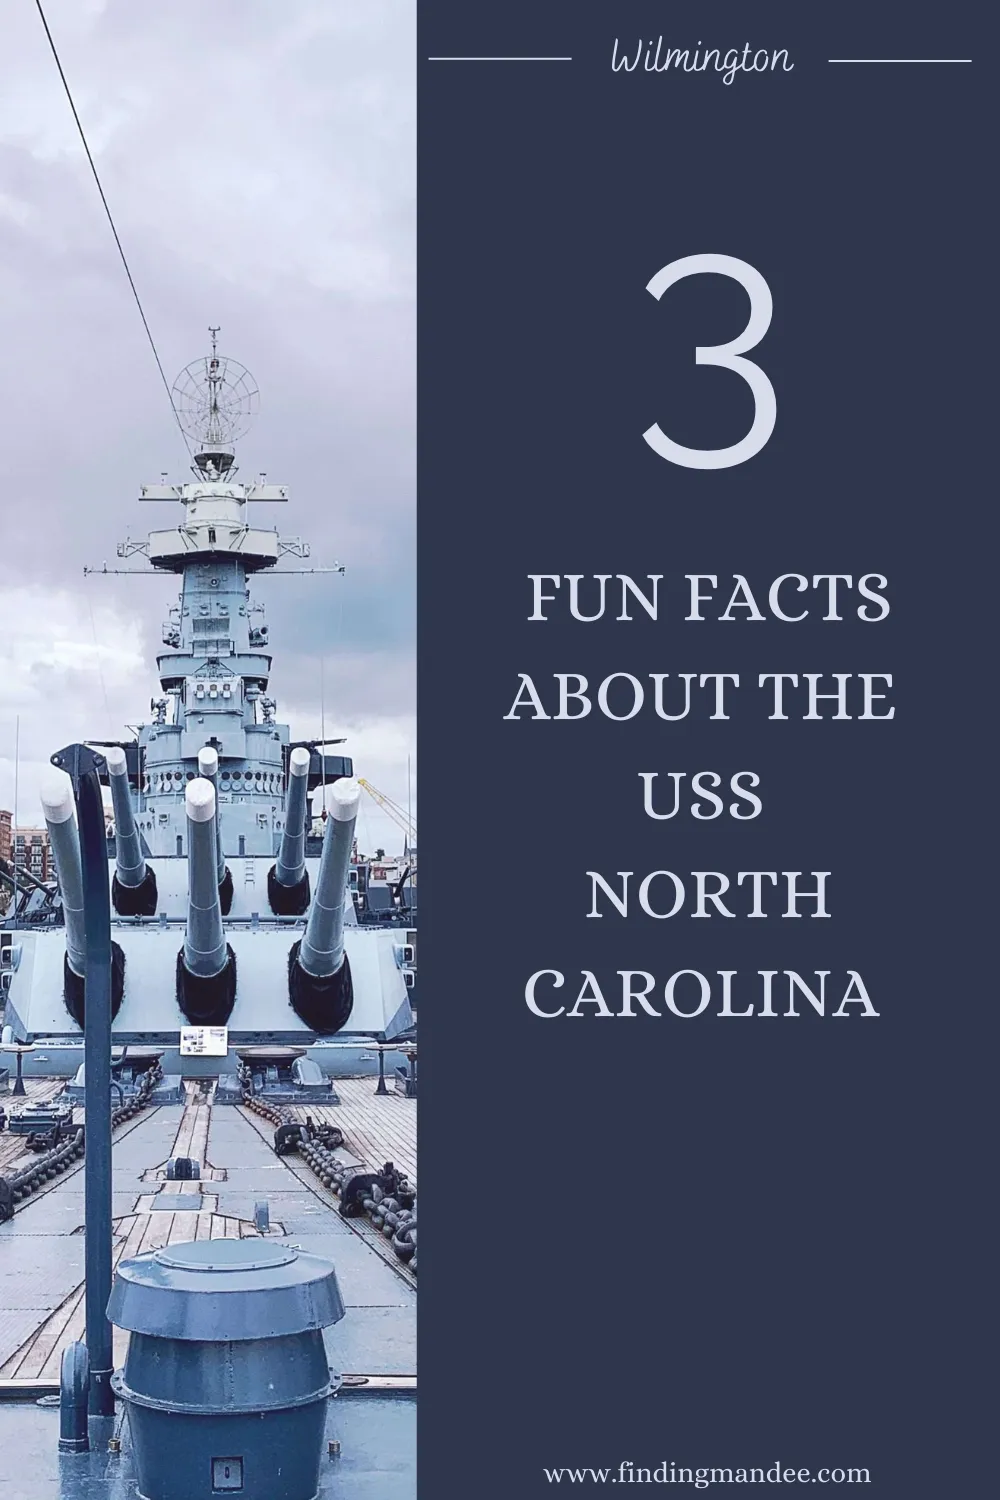 3 Fun Facts About the USS North Carolina | Finding Mandee